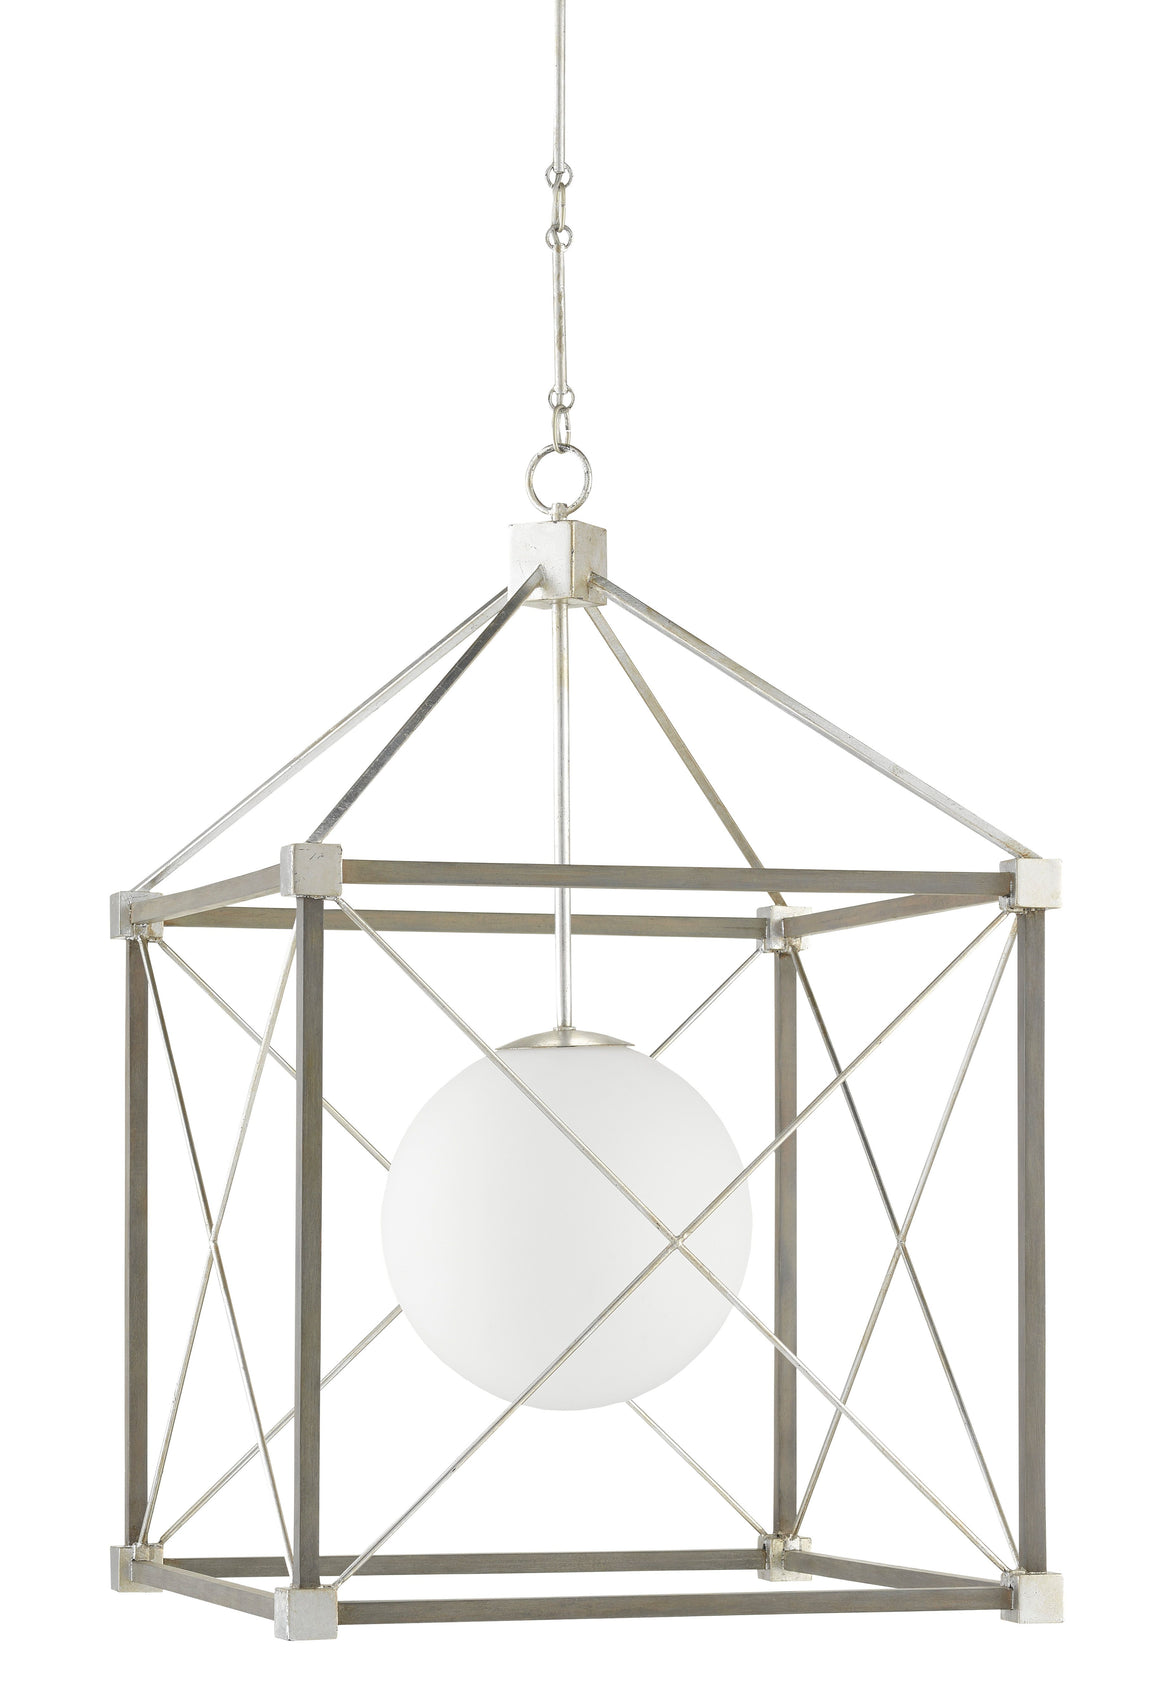 Currey and Company Glendenning Chandelier - Contemporary Silver Leaf/Chateau